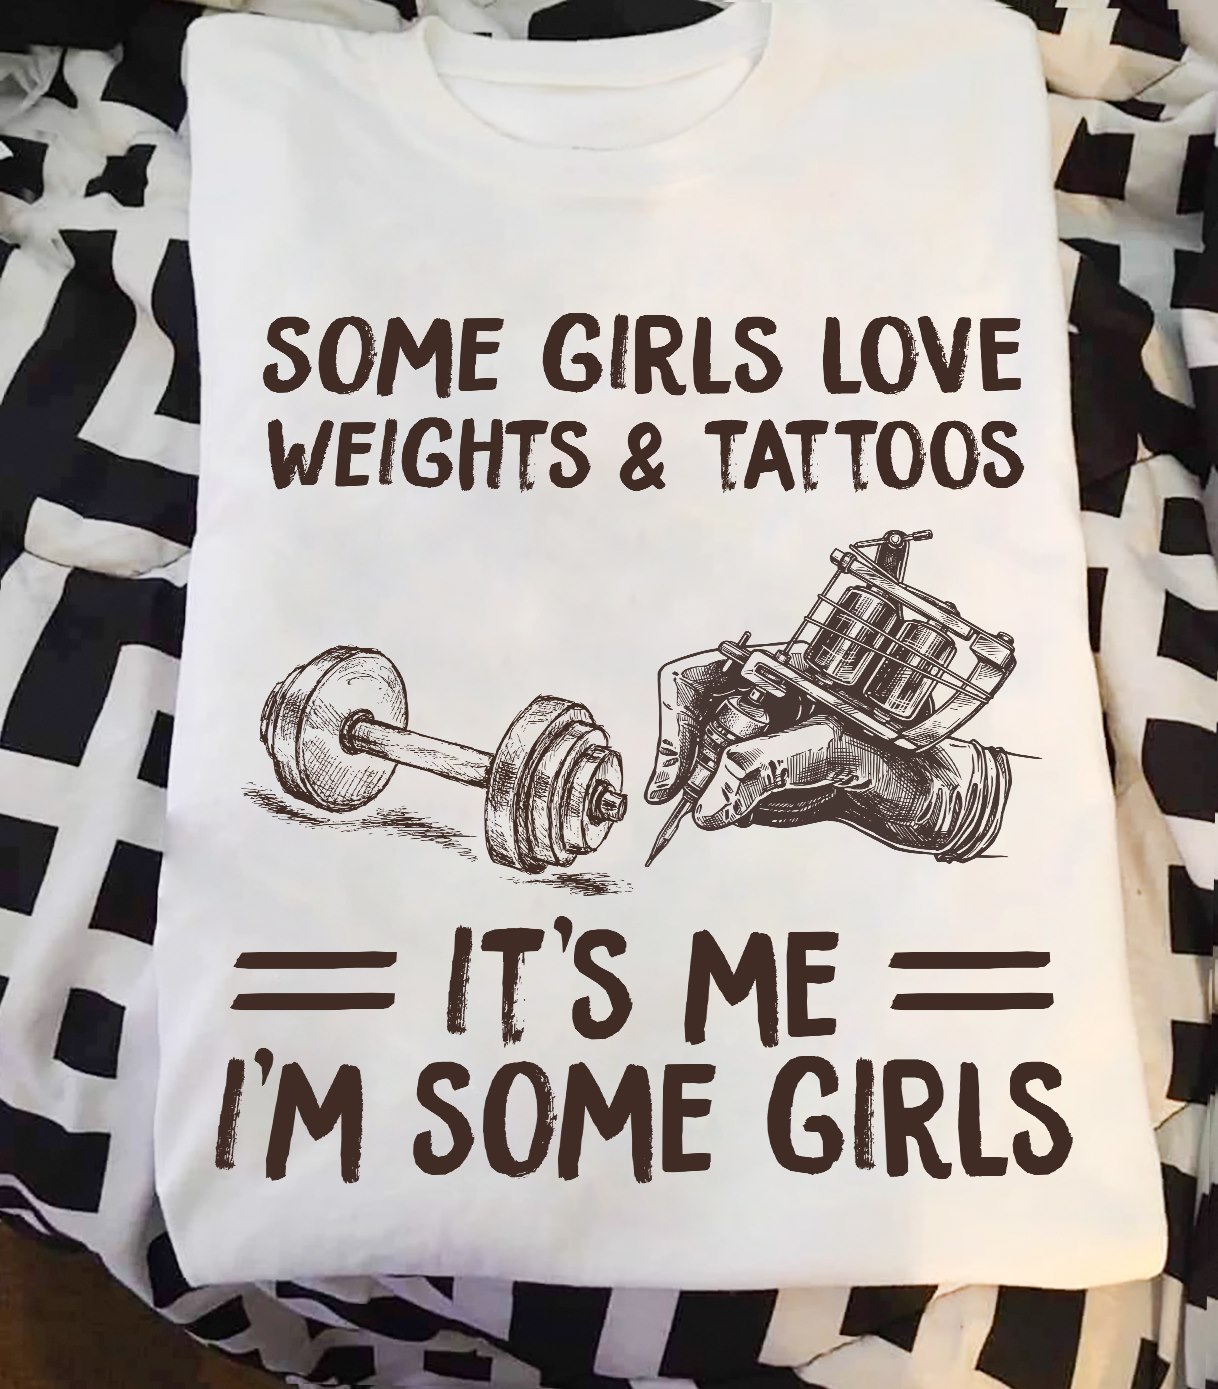 Some girls love weights and tattoos - Weights and tattoos